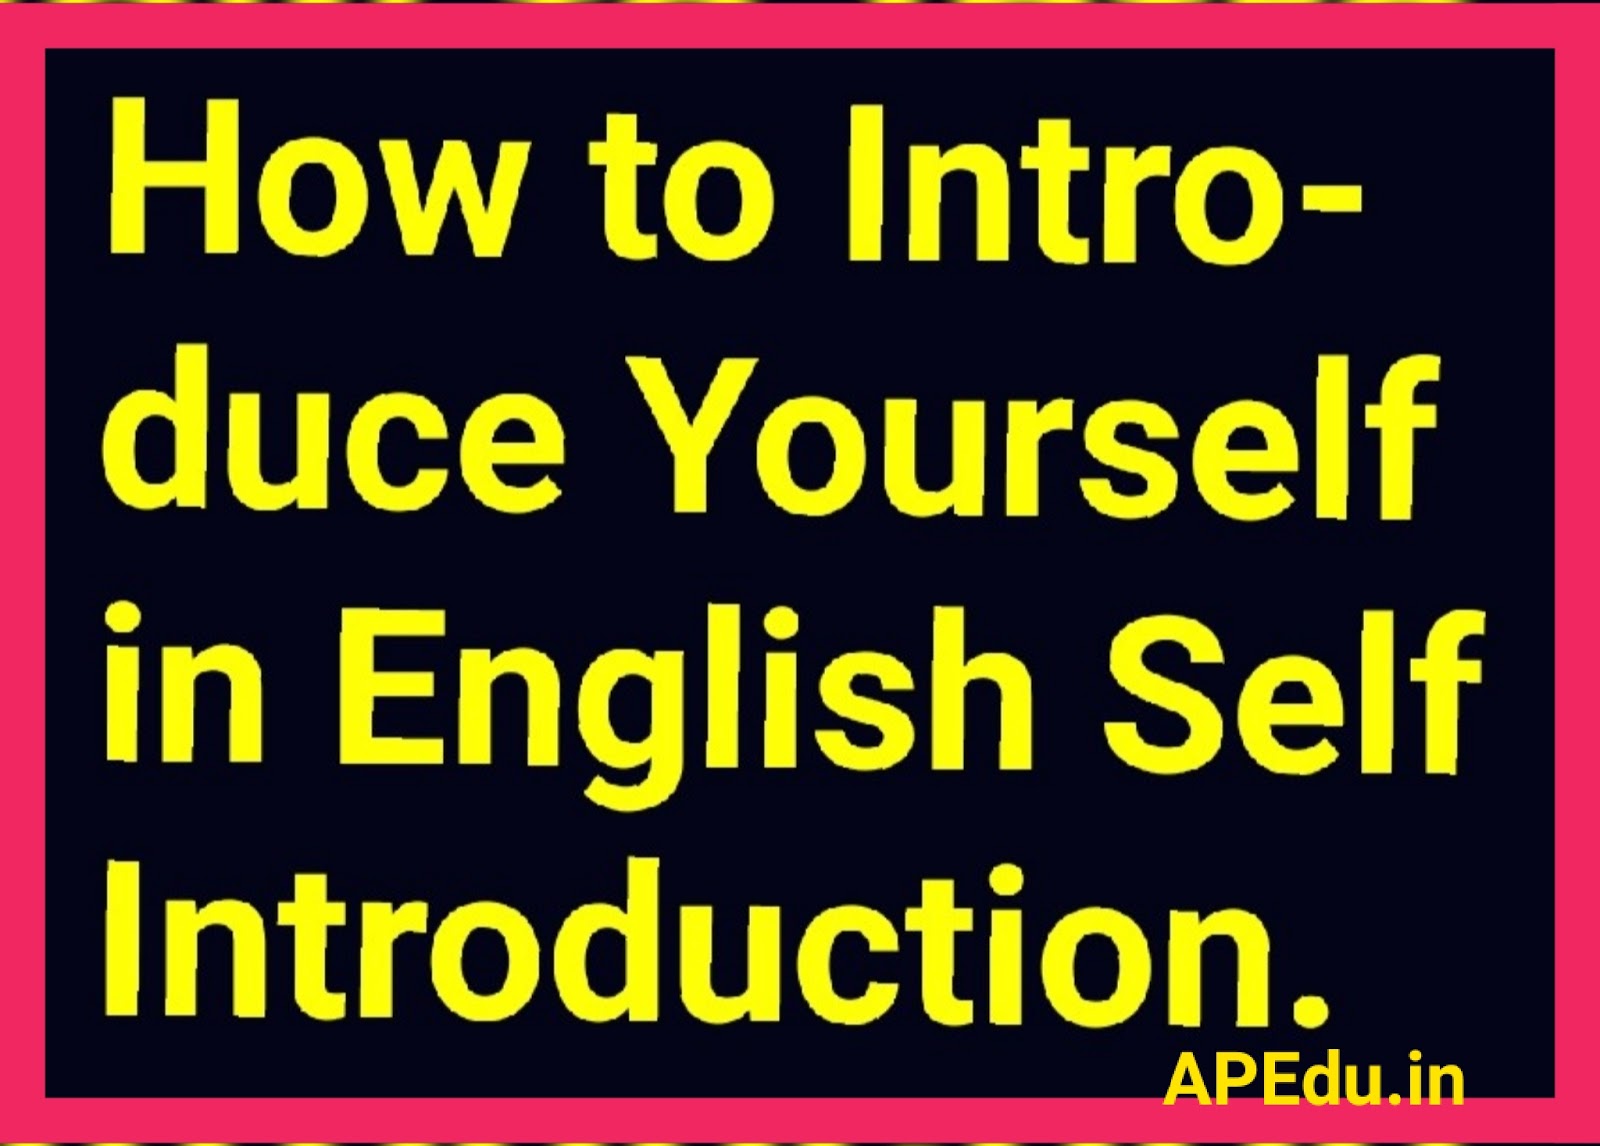 How to Introduce Yourself in English Self Introduction - APEdu